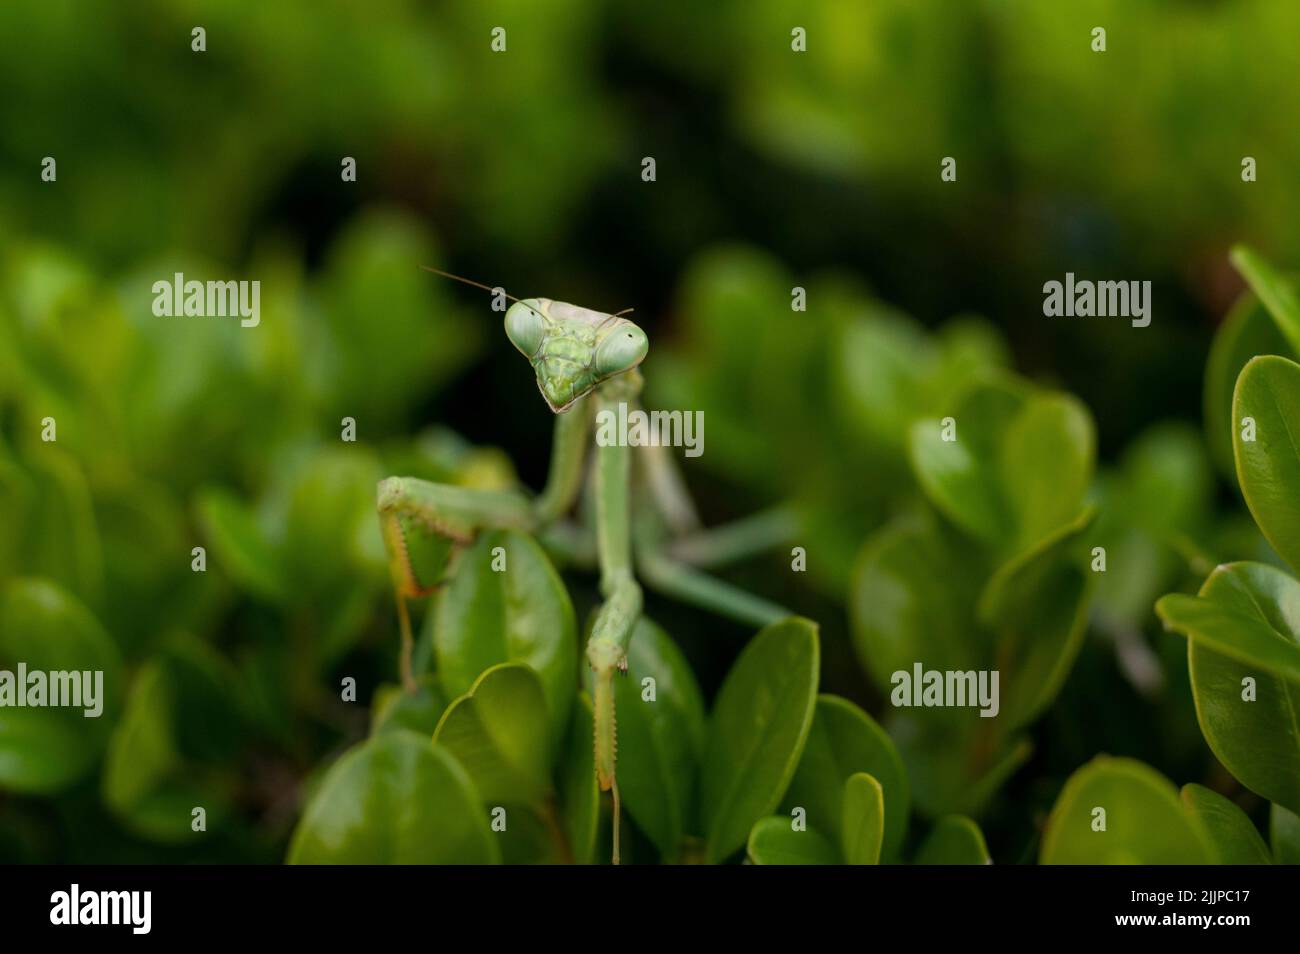 A mantis on plant leaves Stock Photo